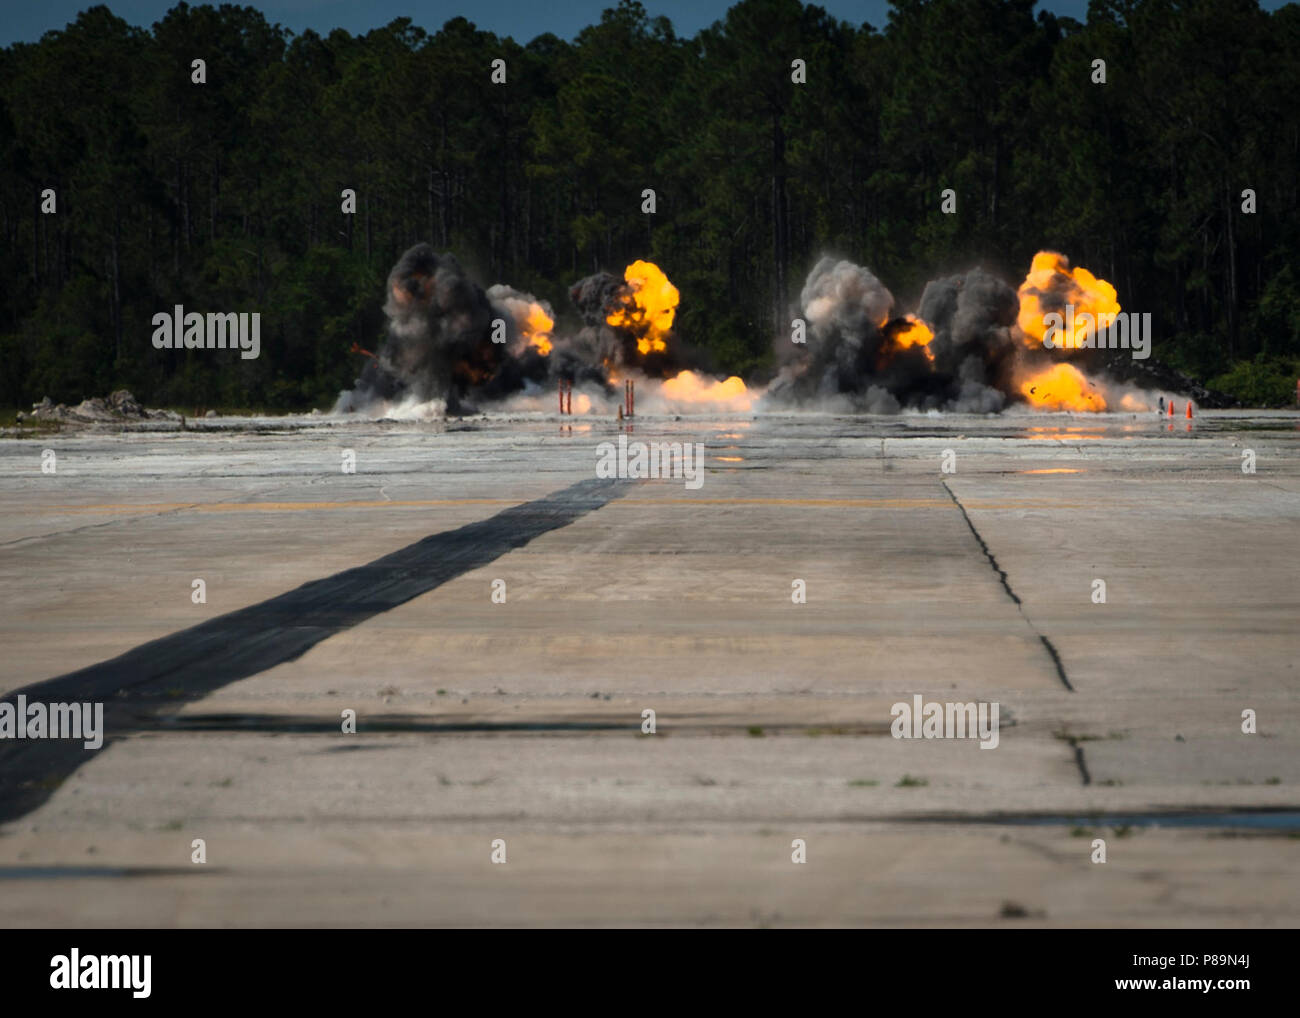 TYNDALL AIR FORCE BASE, Fla. (June 27, 2018) – Explosive Ordnance Disposal (EOD) Mobile Unit 12 technicians simulate battle damage to a runway during the annual airfield damage repair (ADR) experiment at Tyndall Air Force Base in Panama City, Florida.  Navy Expeditionary Combat Command conducted the experiment with Seabees, EOD personnel and government sponsored researchers to validate current ADR methods and test new technologies aimed at increasing ADR safety and efficiency.  (U.S. Navy Photo by Mass Communication Specialist 1st Class David Kolmel) Stock Photo